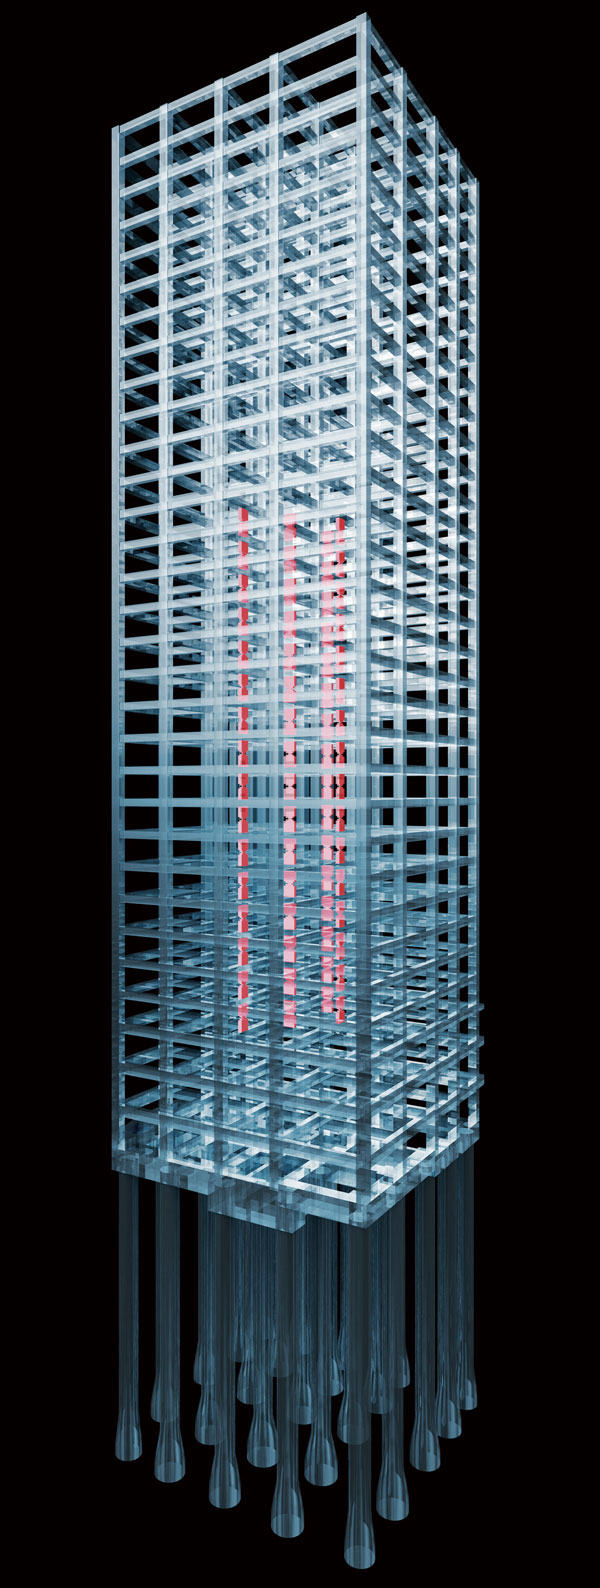 Common utility.  [Honeycomb damper seismic equipment] "Honeycomb damper" is, In the system to absorb the built-in sway to the structural framework, such as a wall and beams, By absorbing such as seismic energy applied to the building in the damper, To prevent damage to the building body (conceptual diagram)